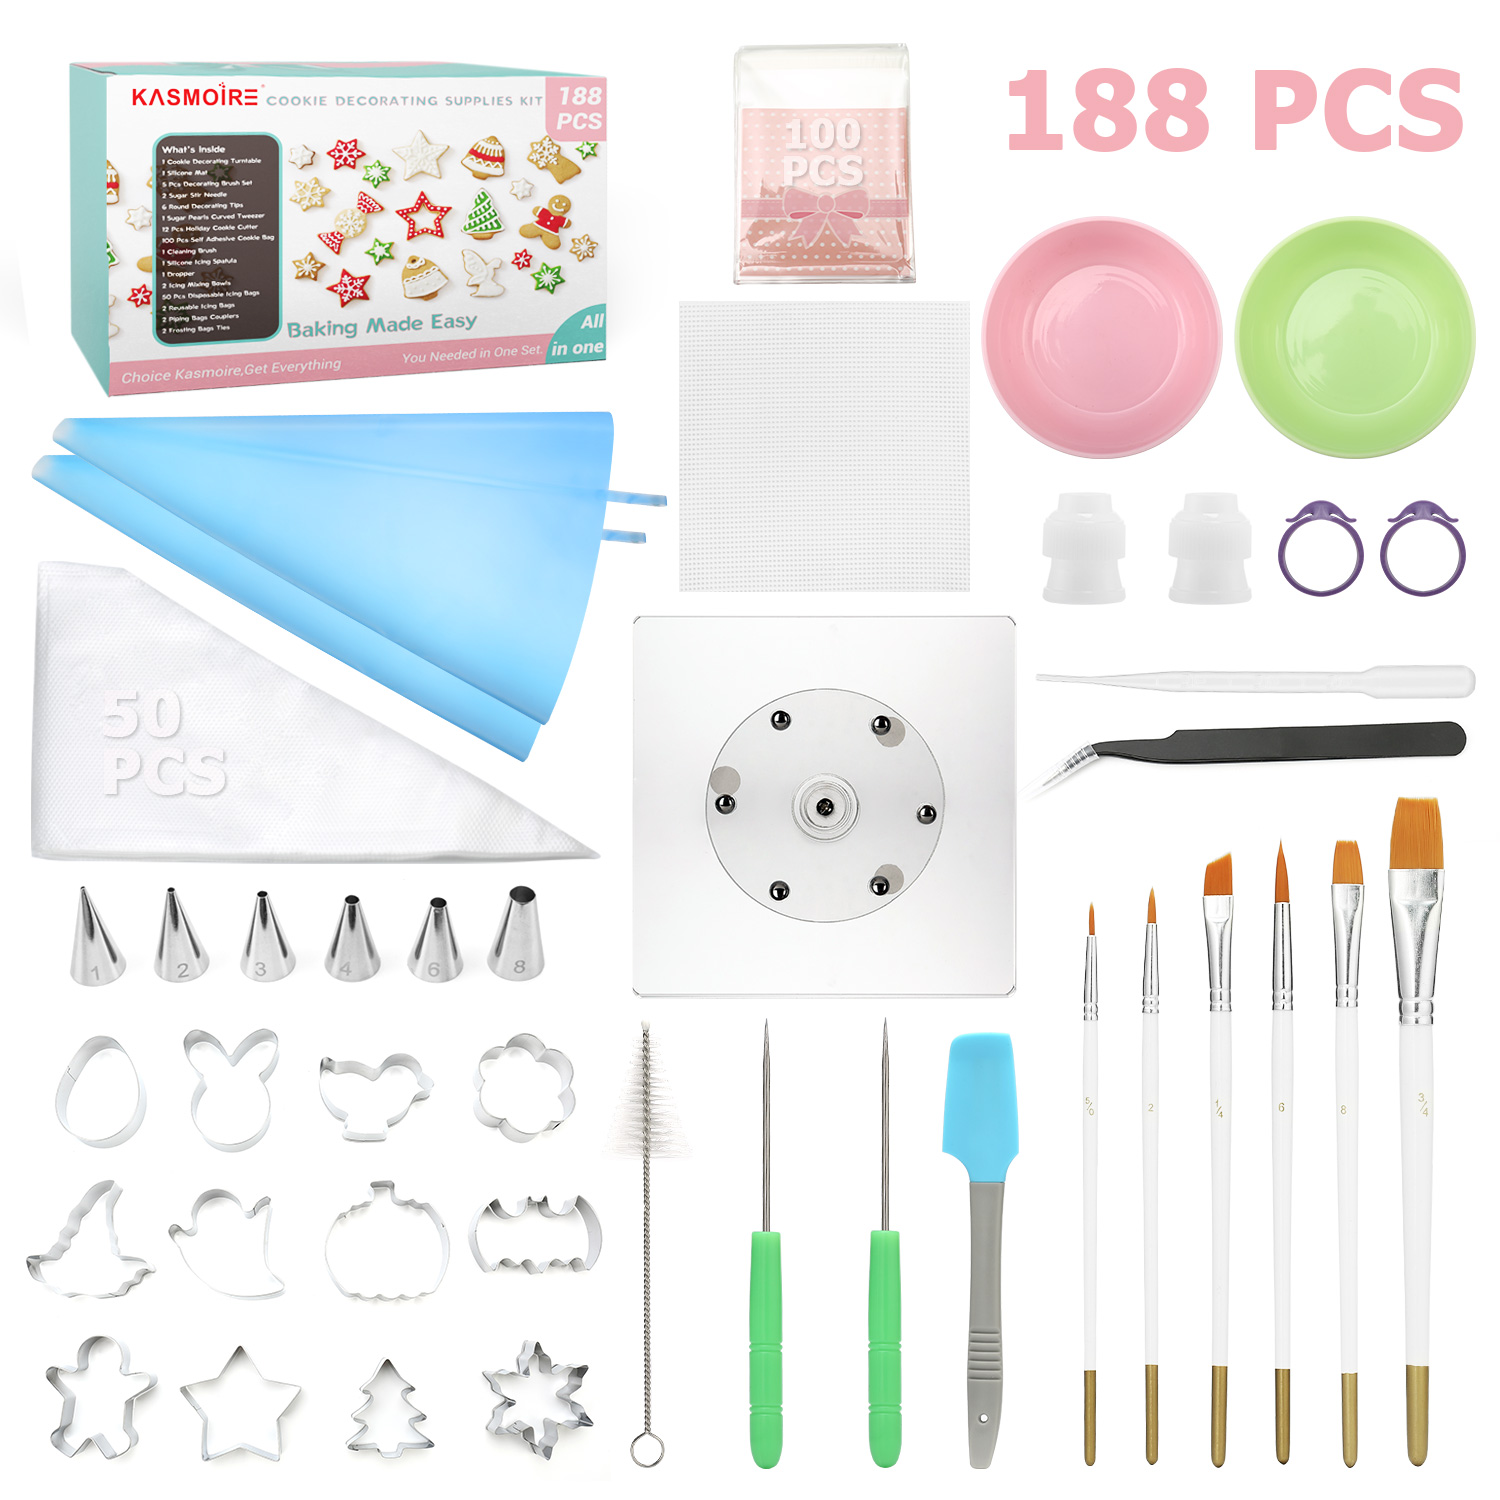 Kasmoire 188pcs Cookie Decorating Supplies Kit,with 12pcs holiday cookie cutter,Mixing Tools,Piping Tools,Decorating Tools and  Cookies Bags